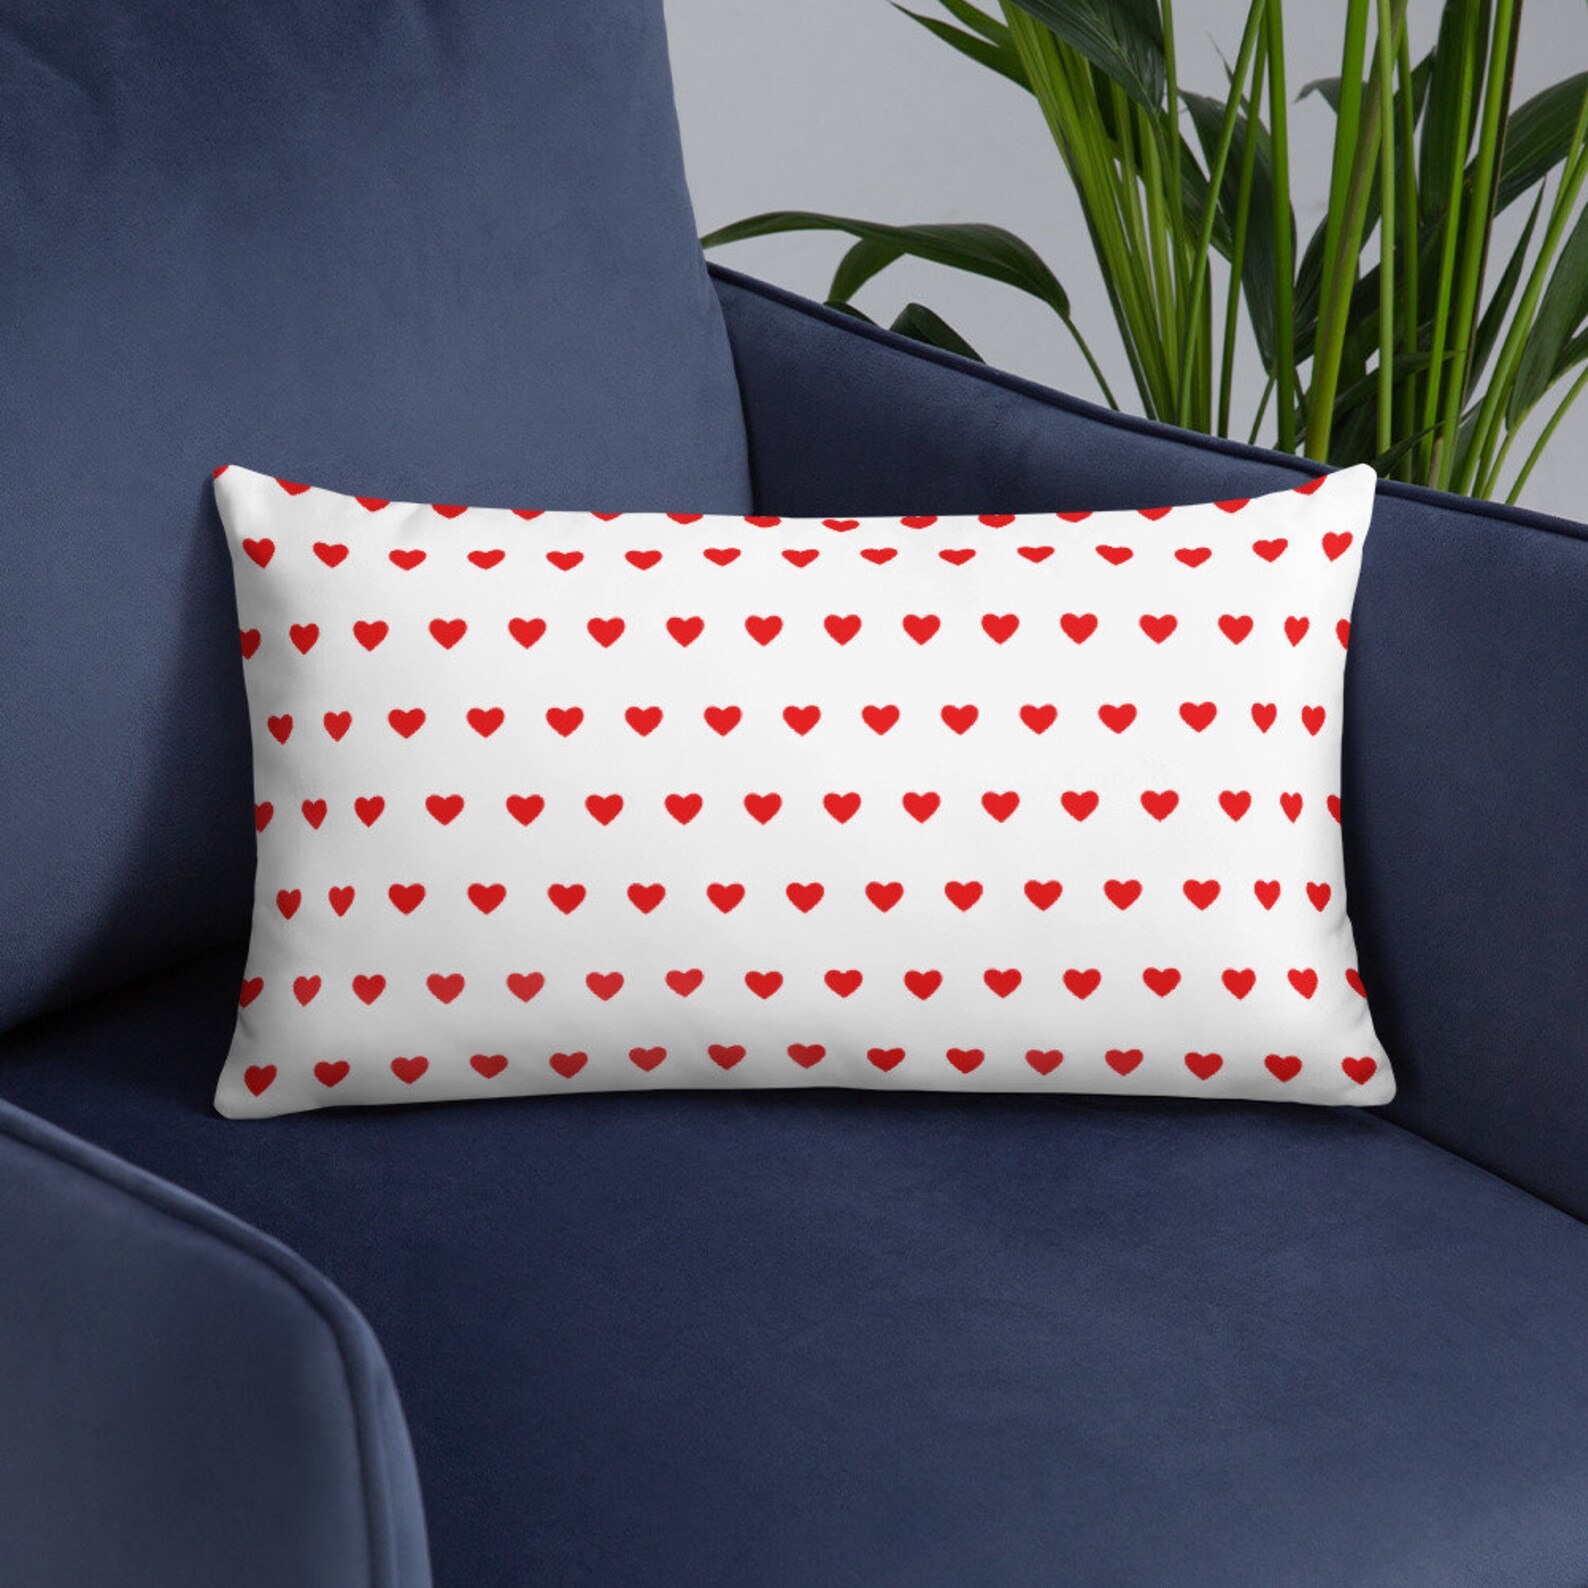 16 Heart-warming Valentine's Day Pillow Designs to Express Your Love